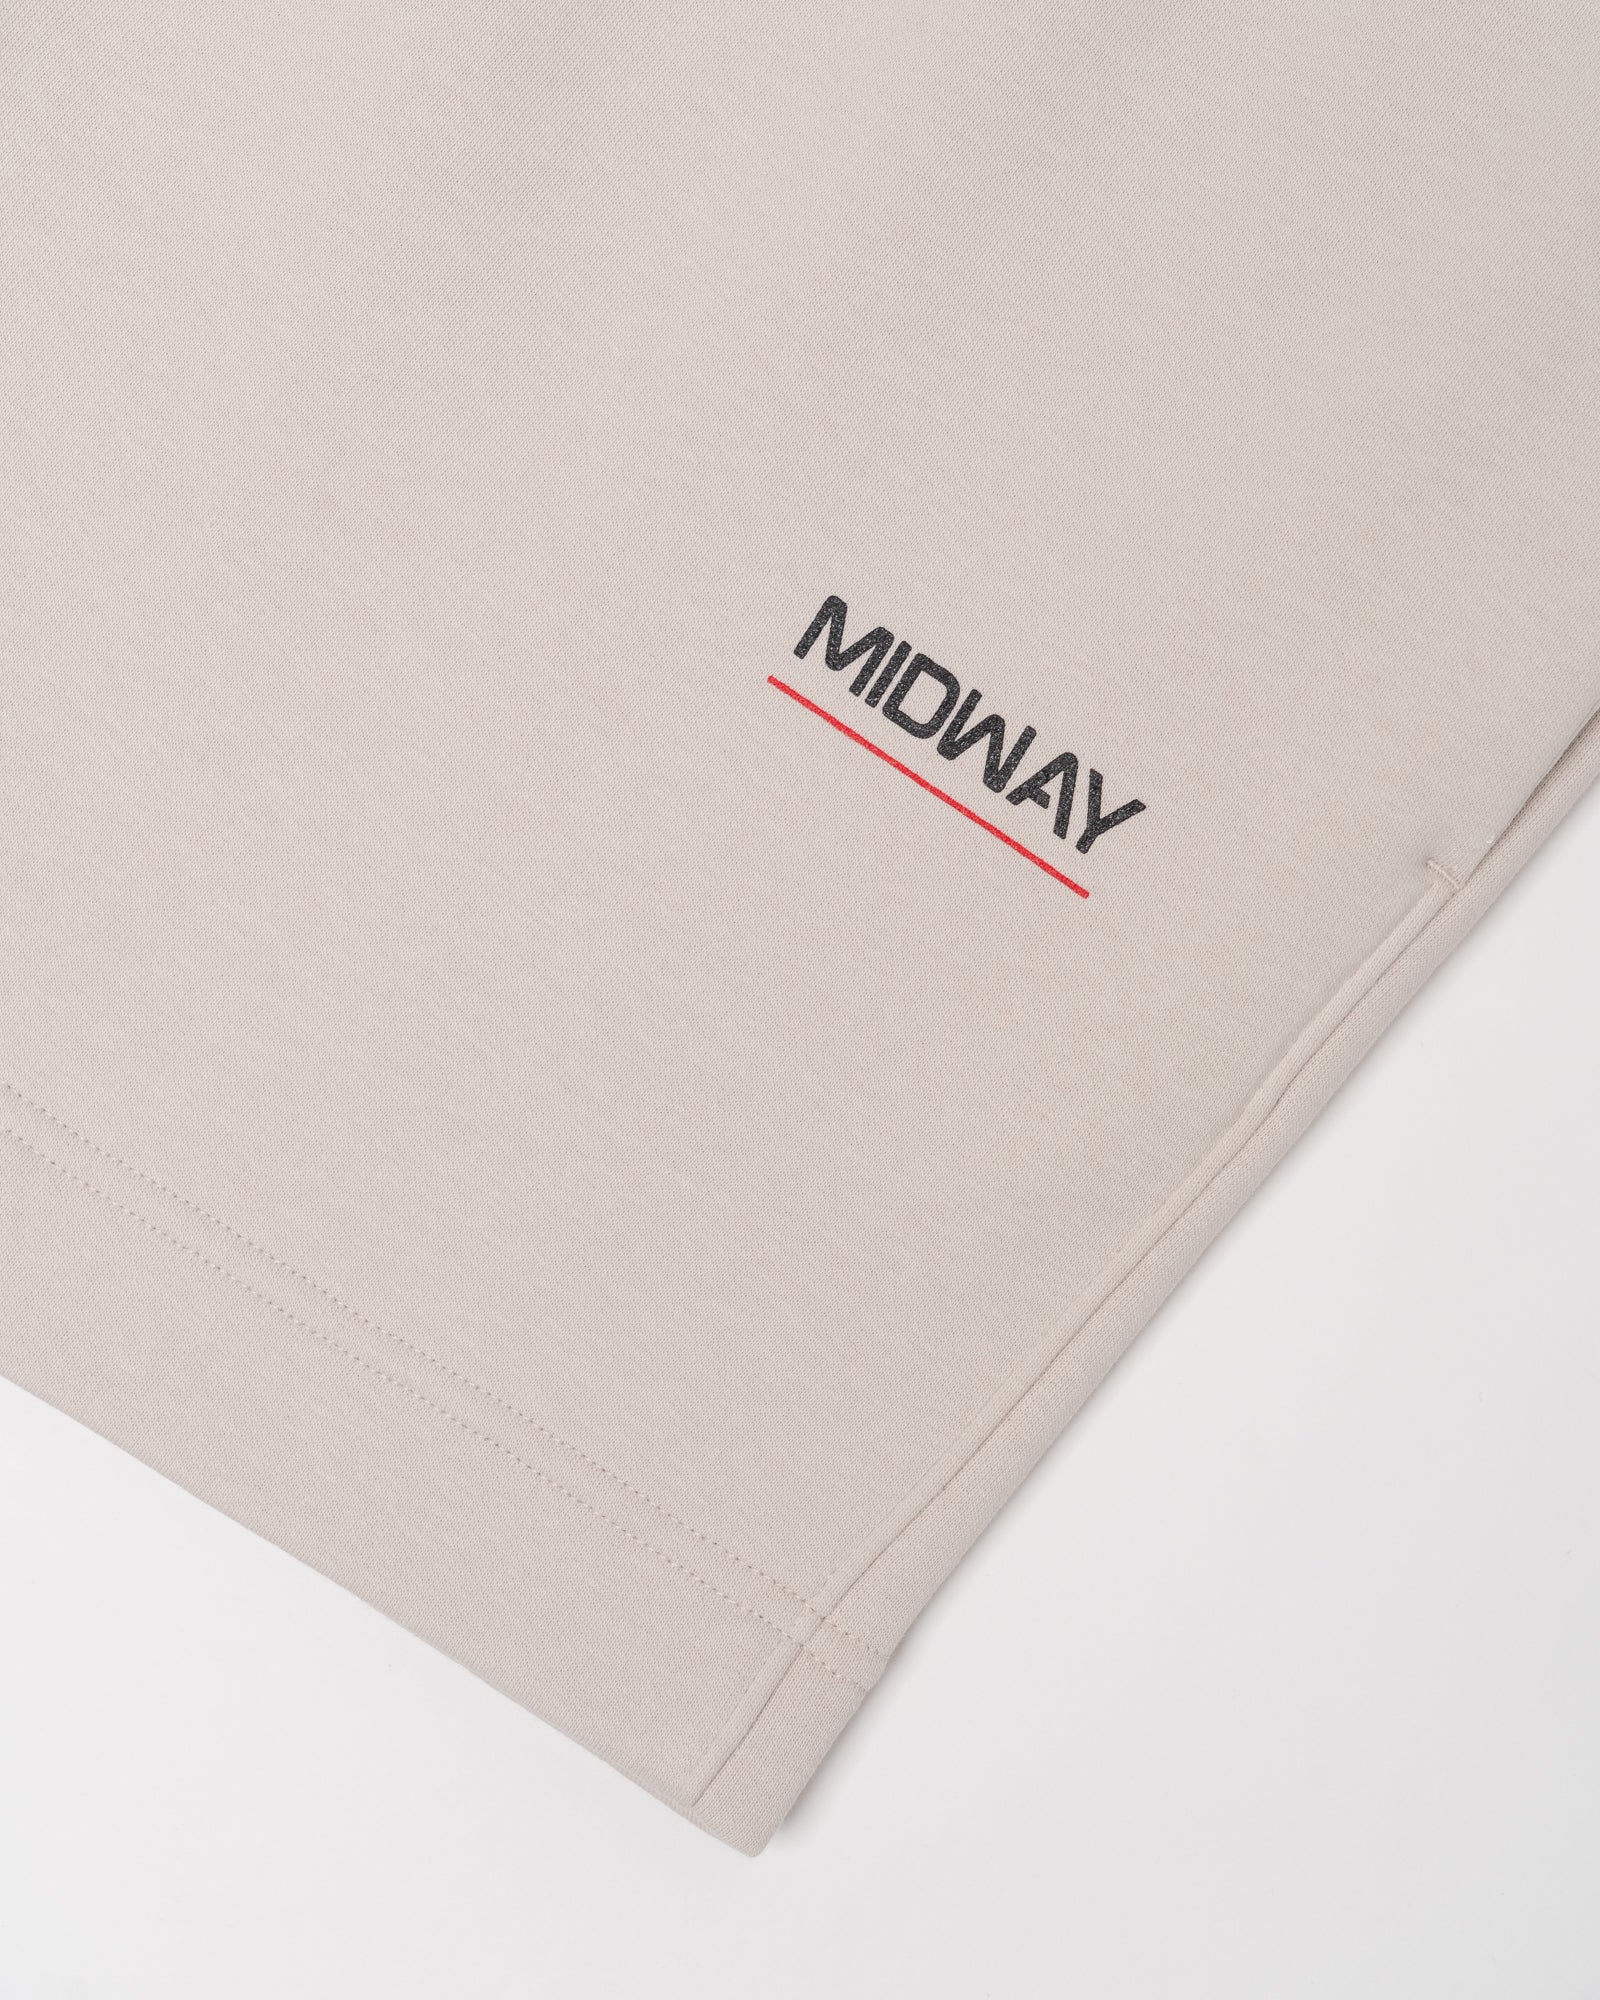 Midway Sportswear Capsule Complete Set | Spring ‘24